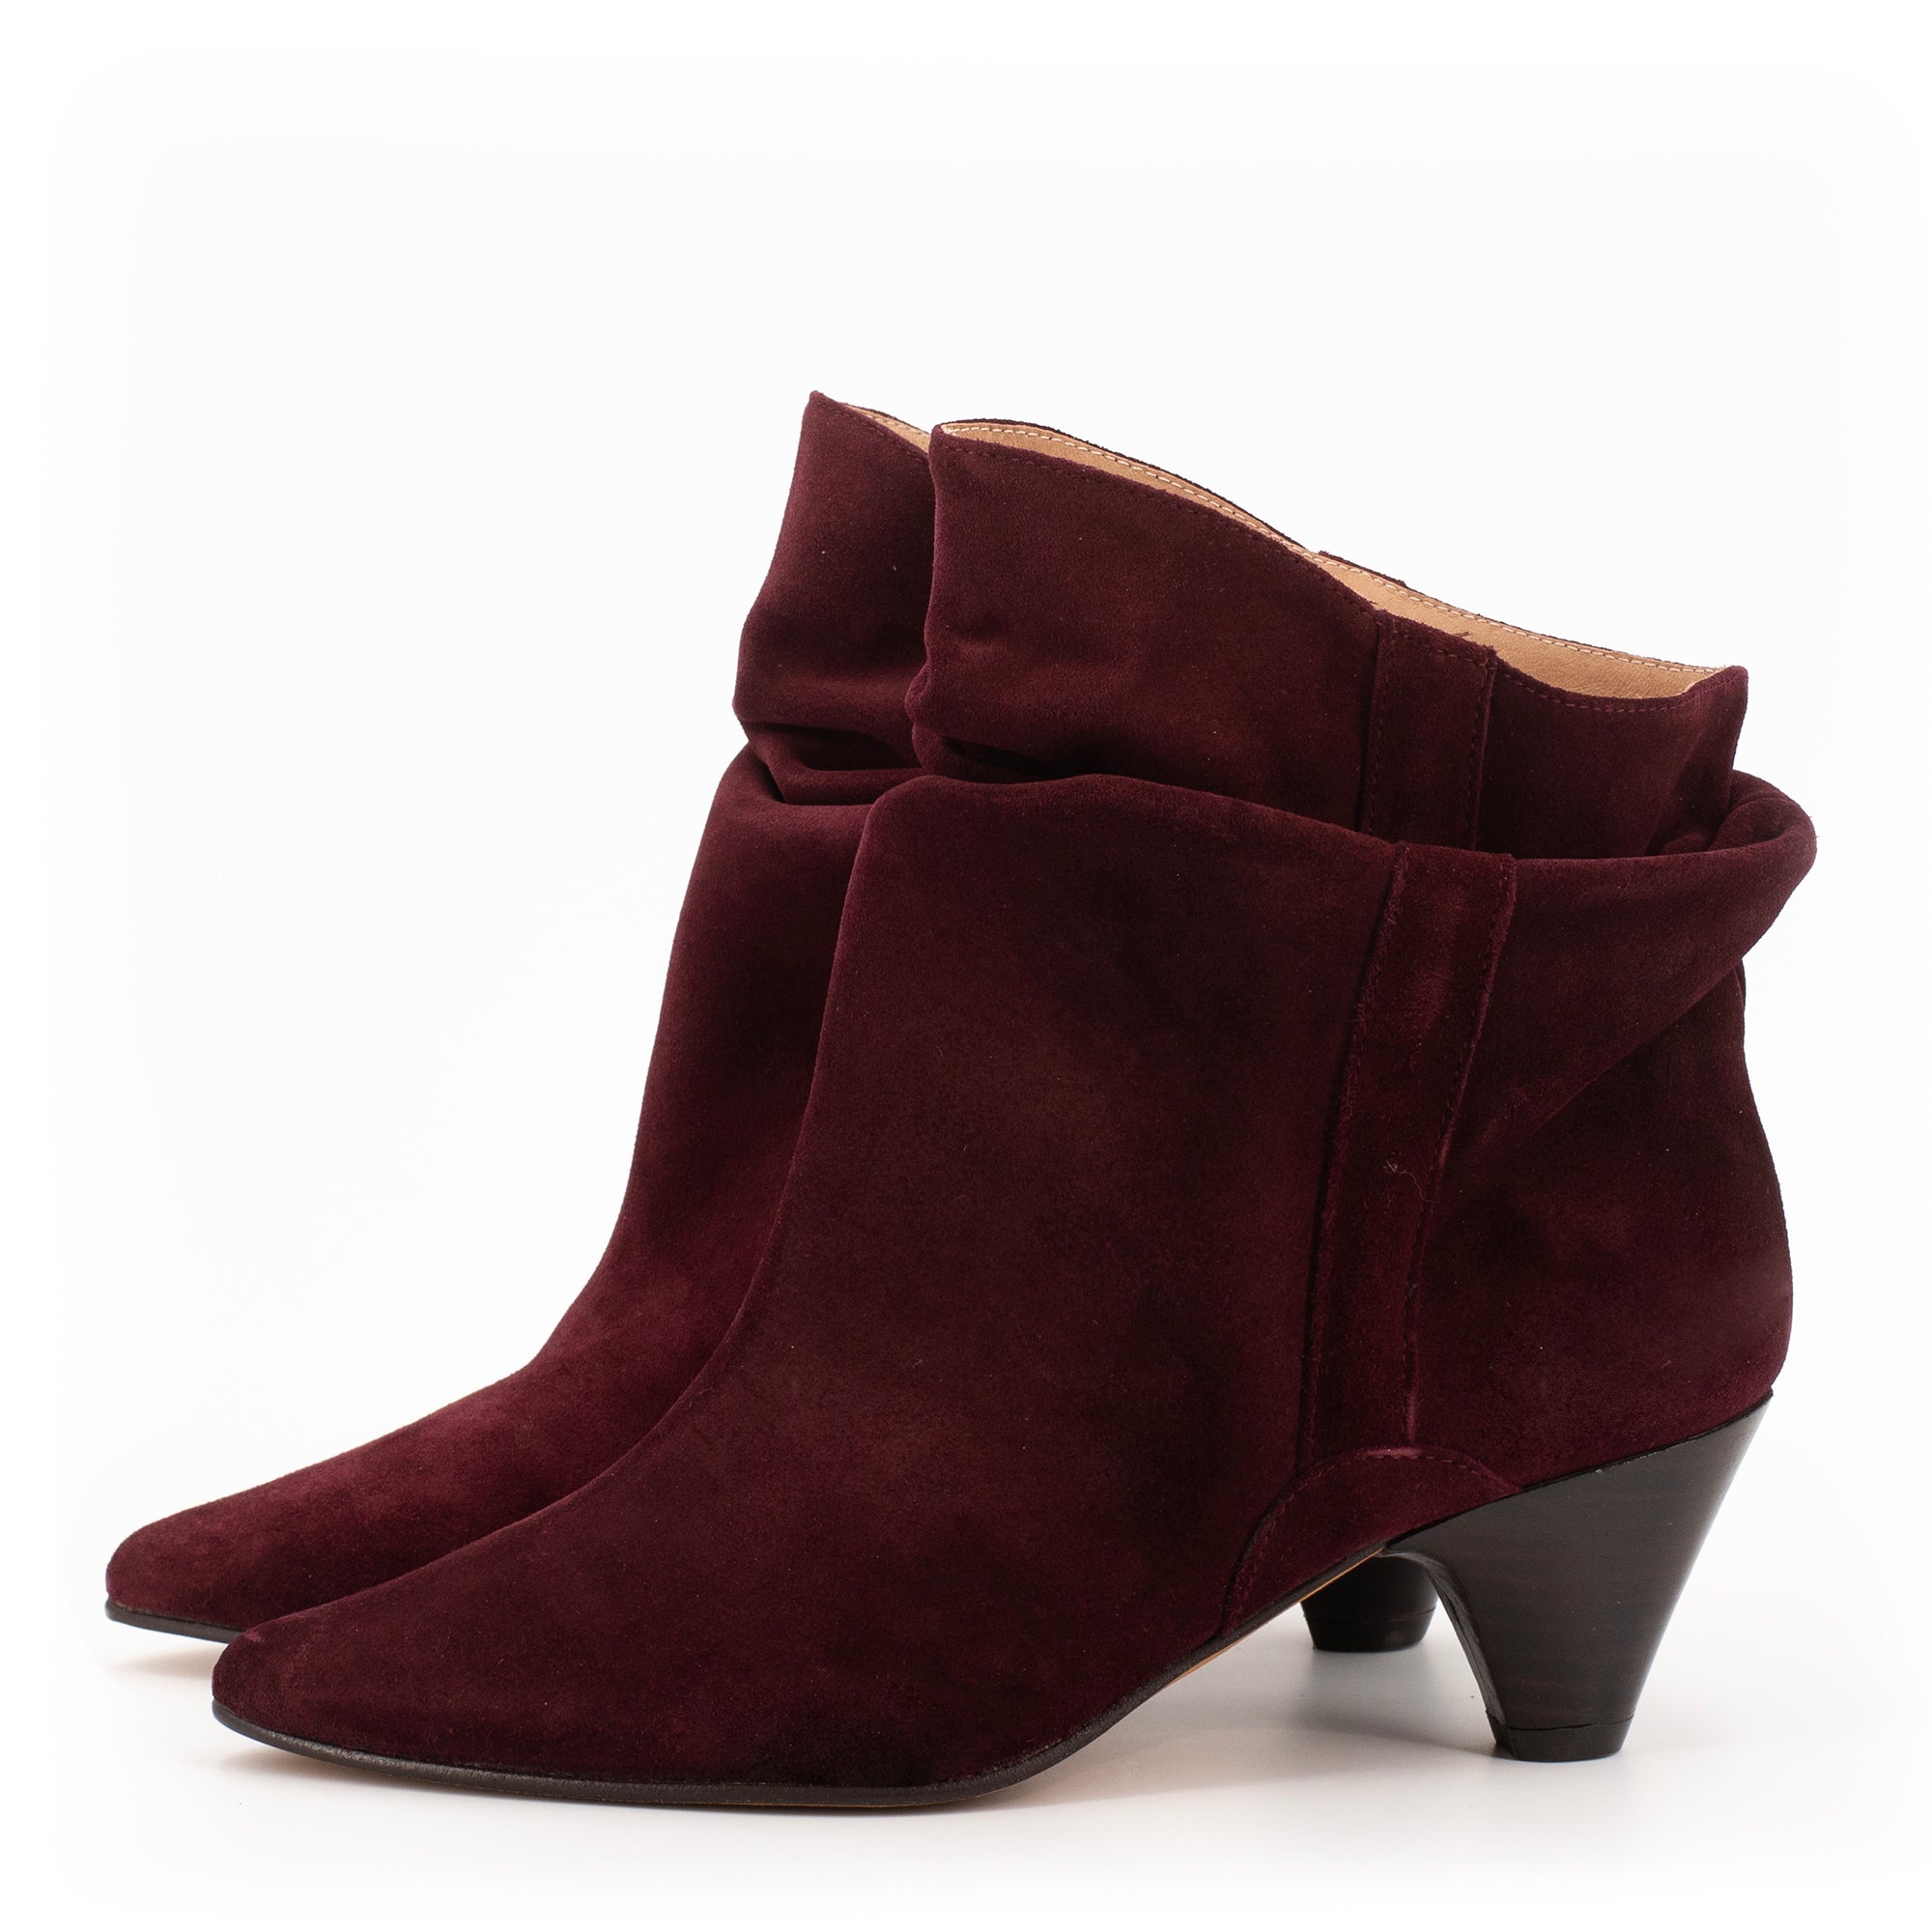 TORAL SUEDE ANKLE BOOTS